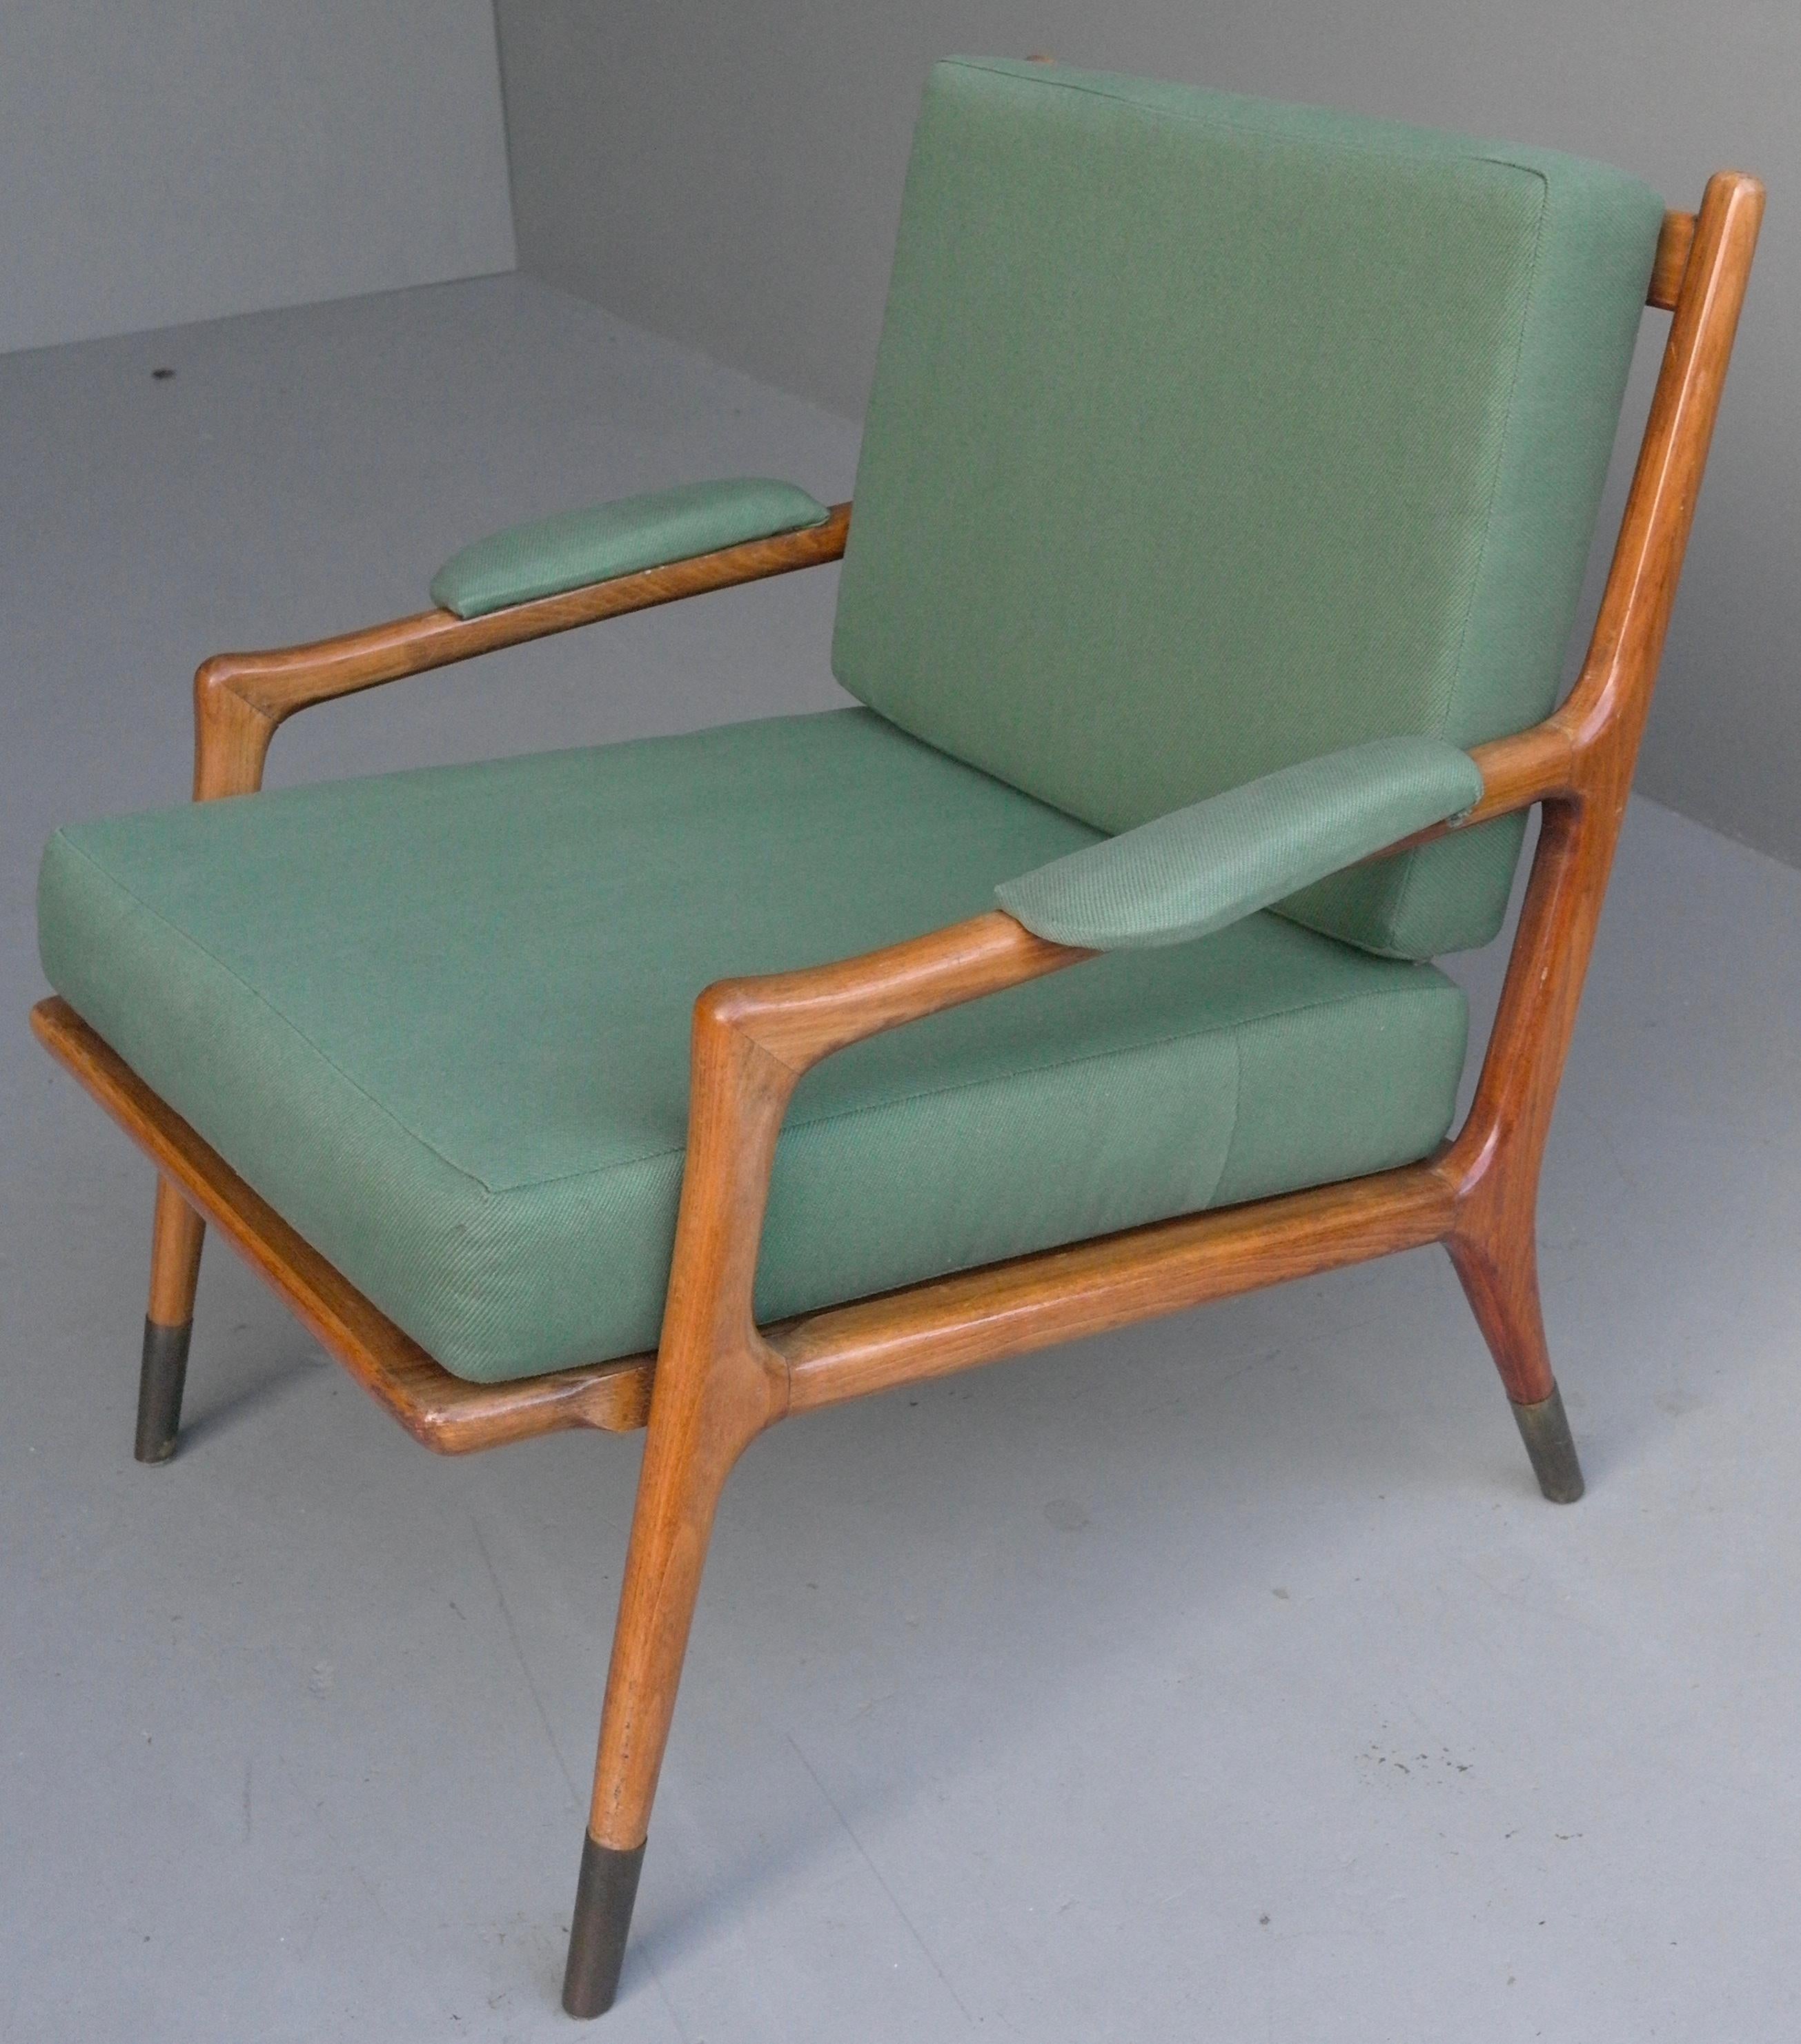 Mid-Century Modern Gio Ponti Style Lounge Chair, Fine Brass Feet and Green Upholstery, Italy, 1955 For Sale